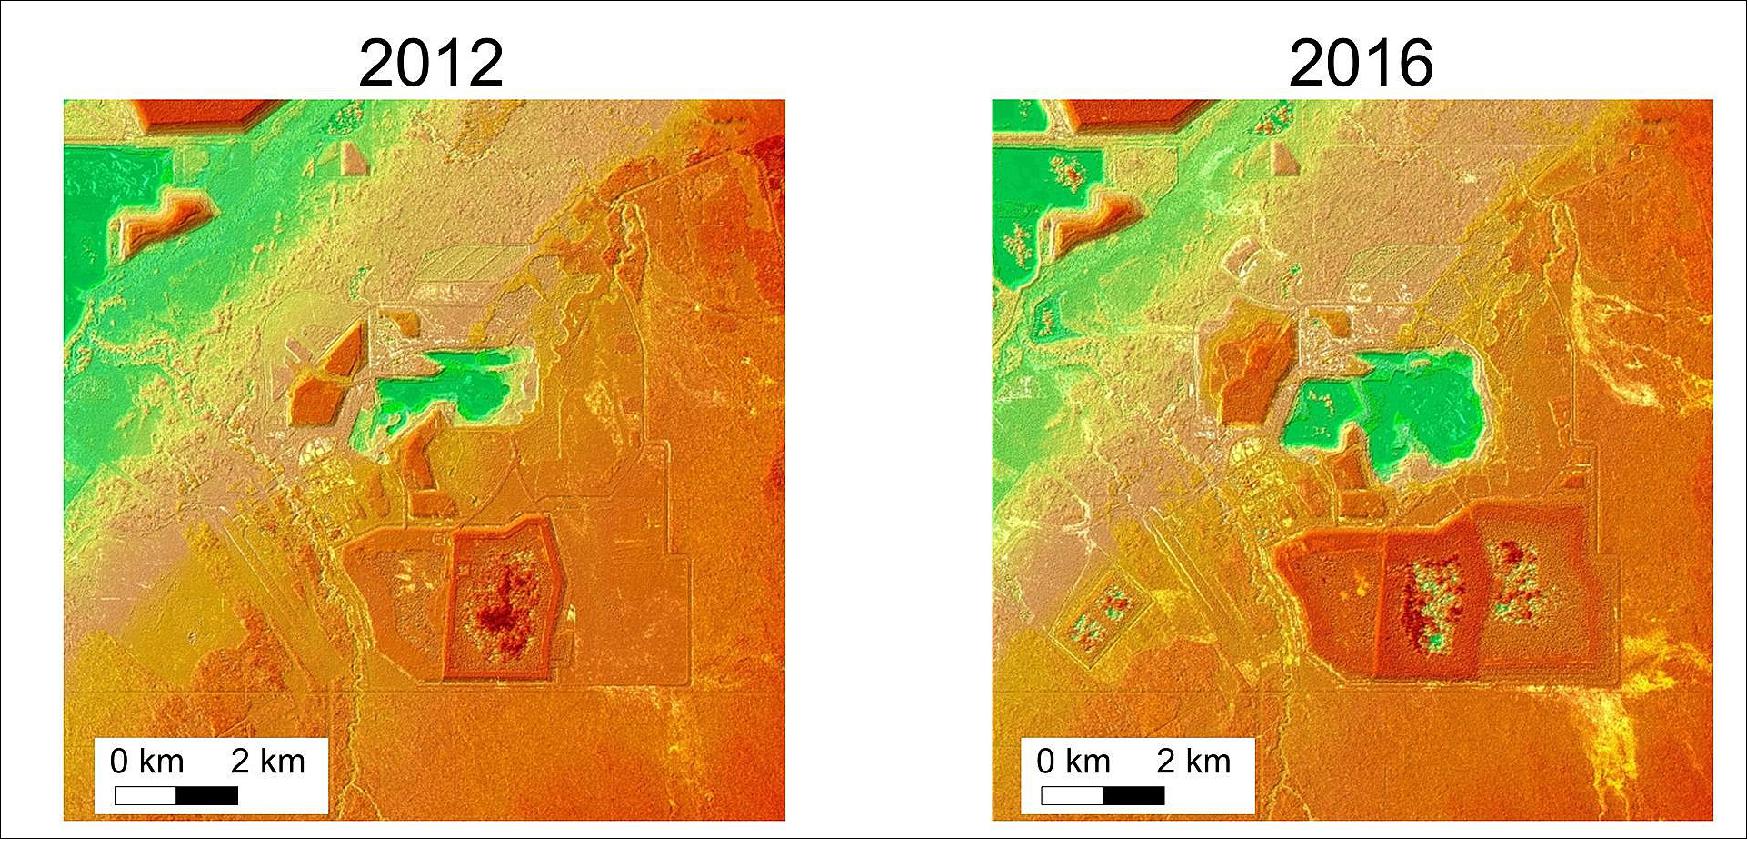 Figure 22: TanDEM-X images of the Aurora North mine in Canada (image credit: DLR)